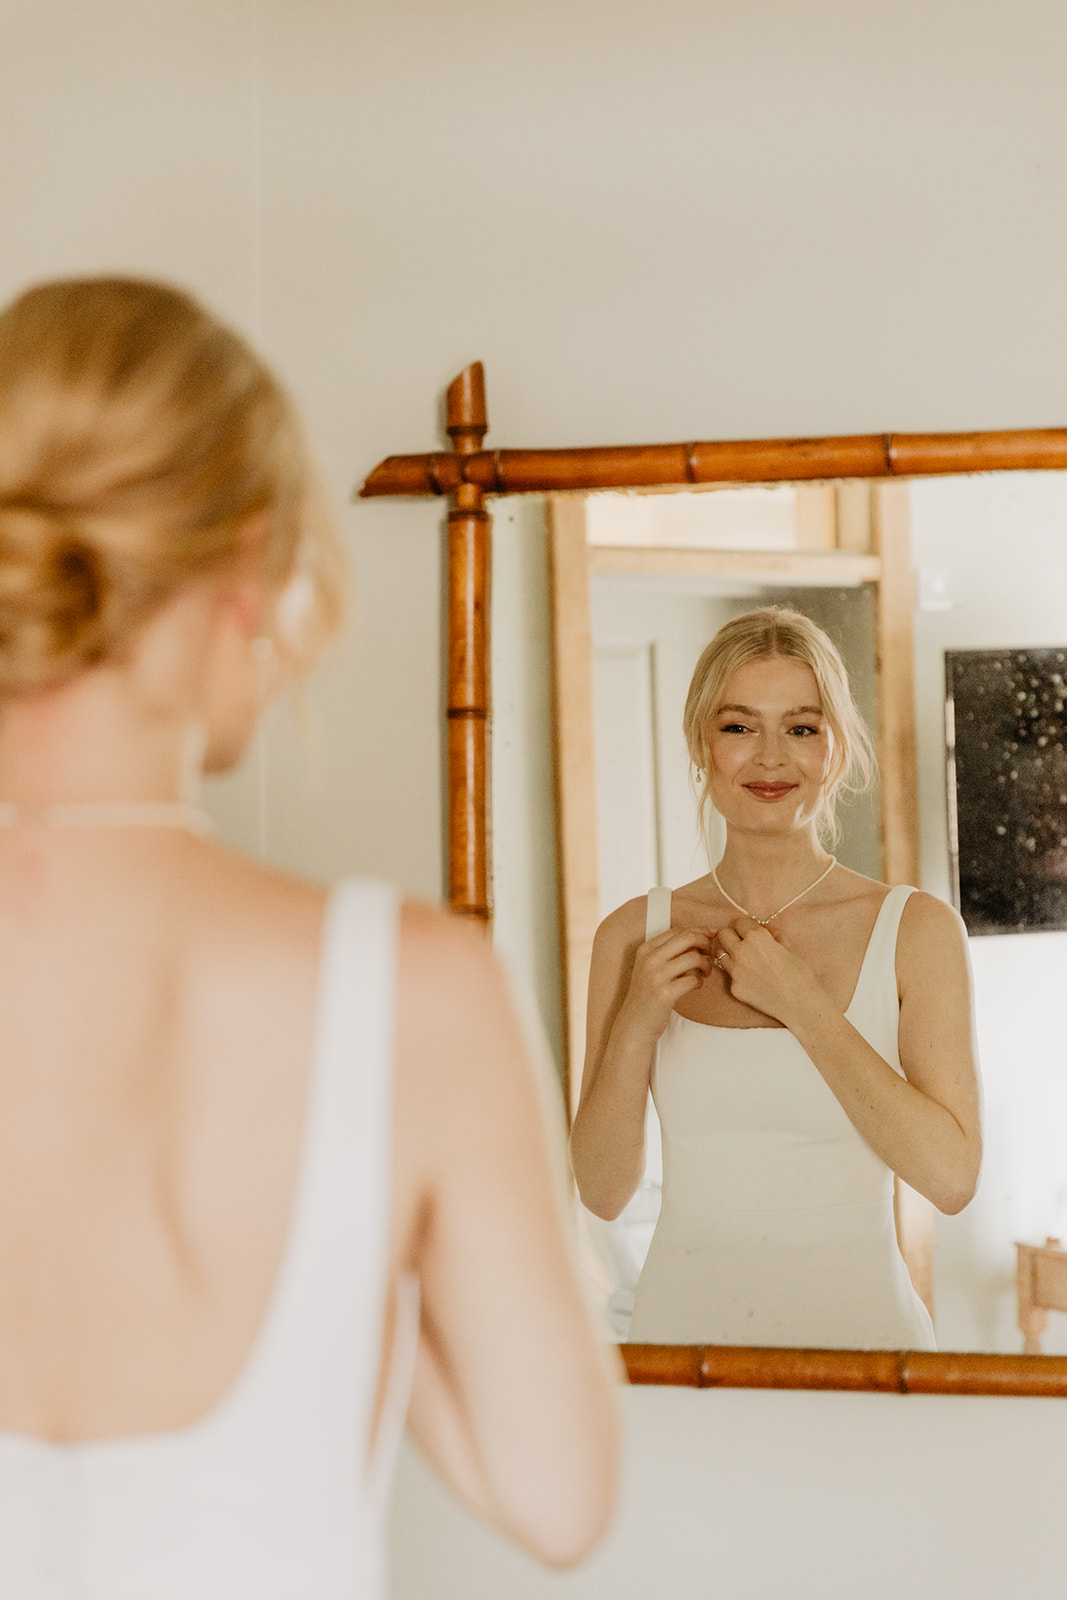 Bride getting ready at a Bury Manor Barn Wedding in Sussex. Photographer OliveJoy Photography.